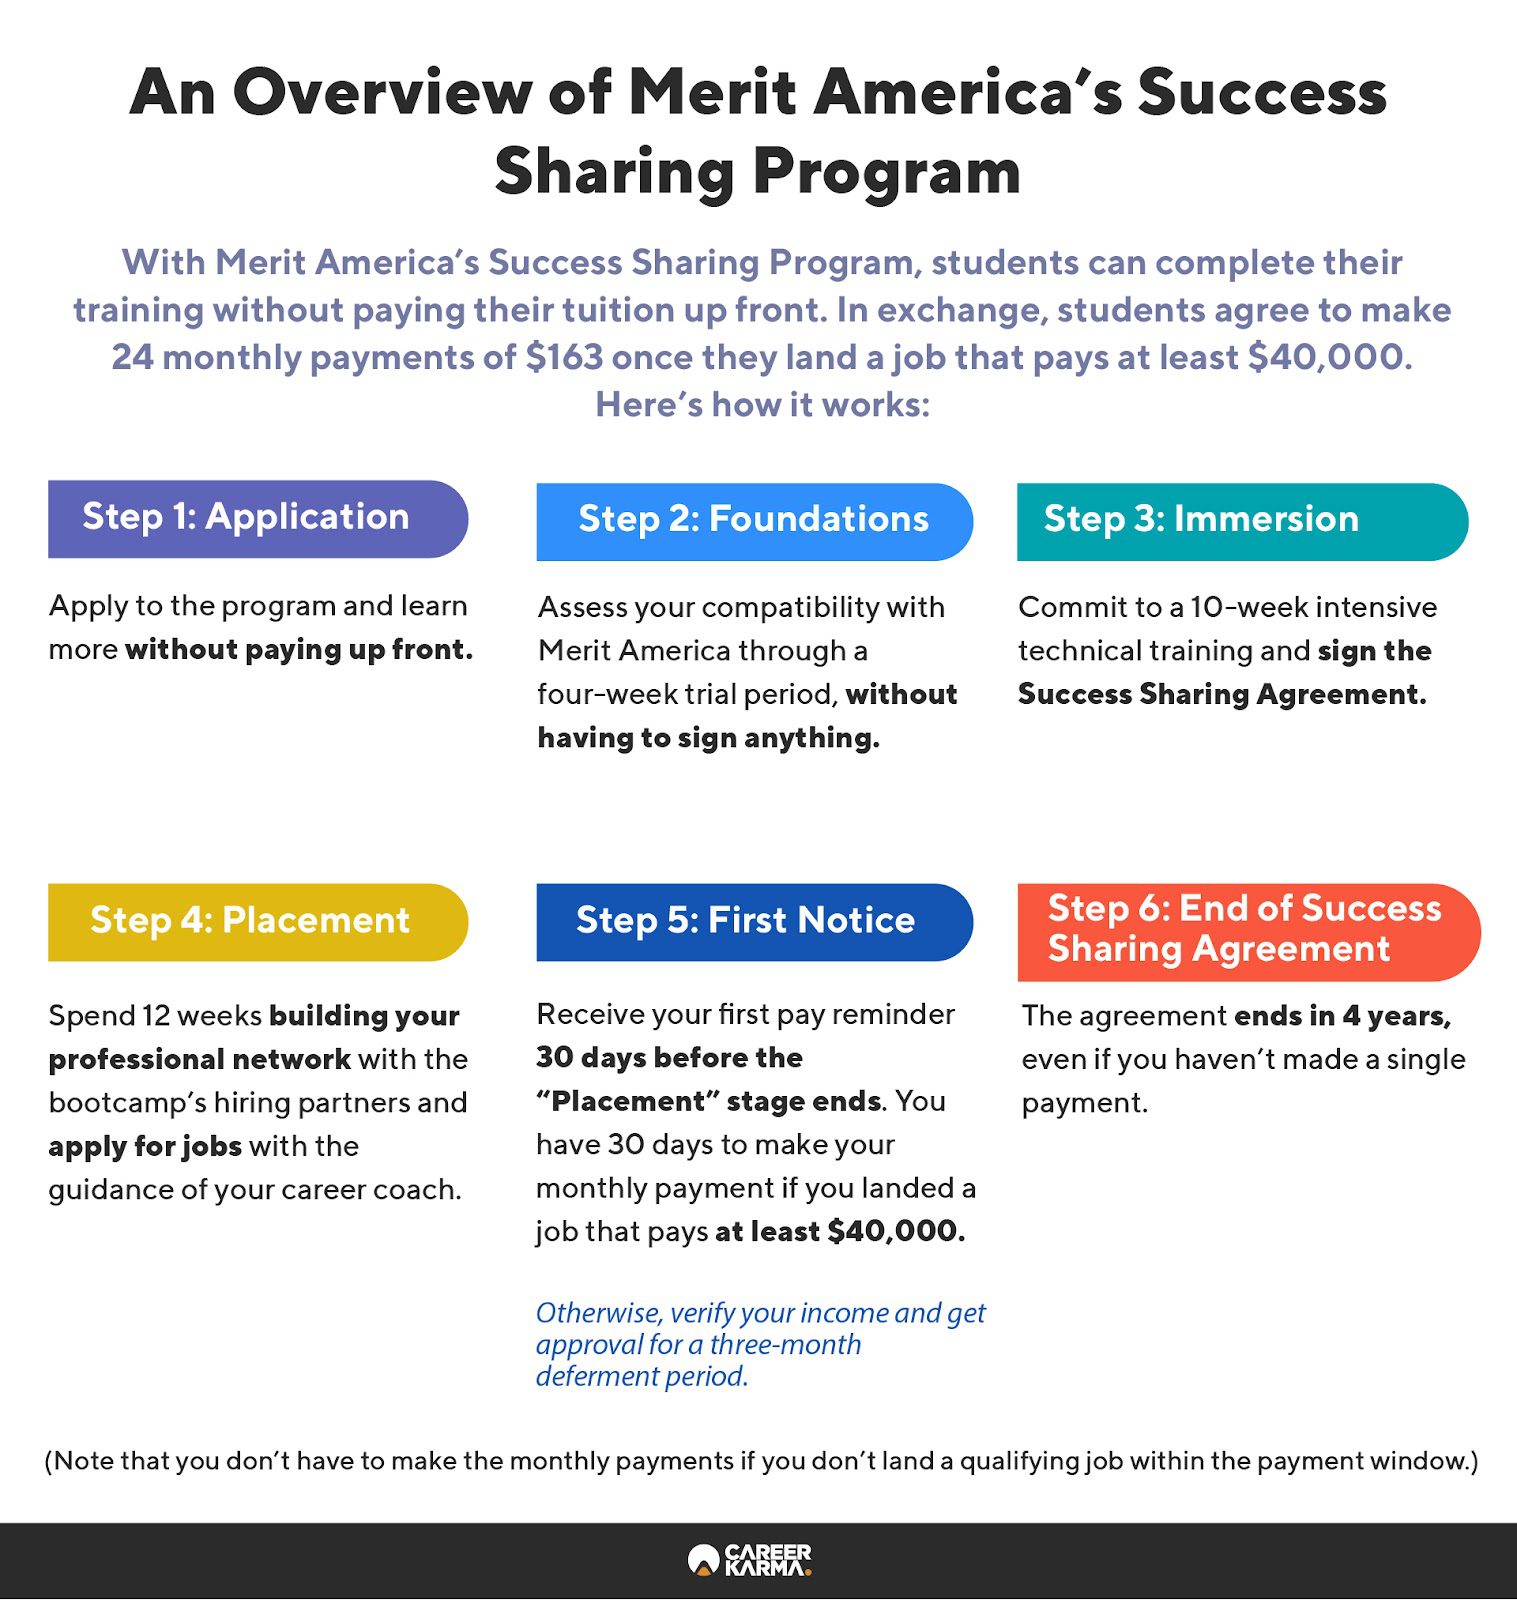 An infographic showing how Merit America’s Success Sharing Program works